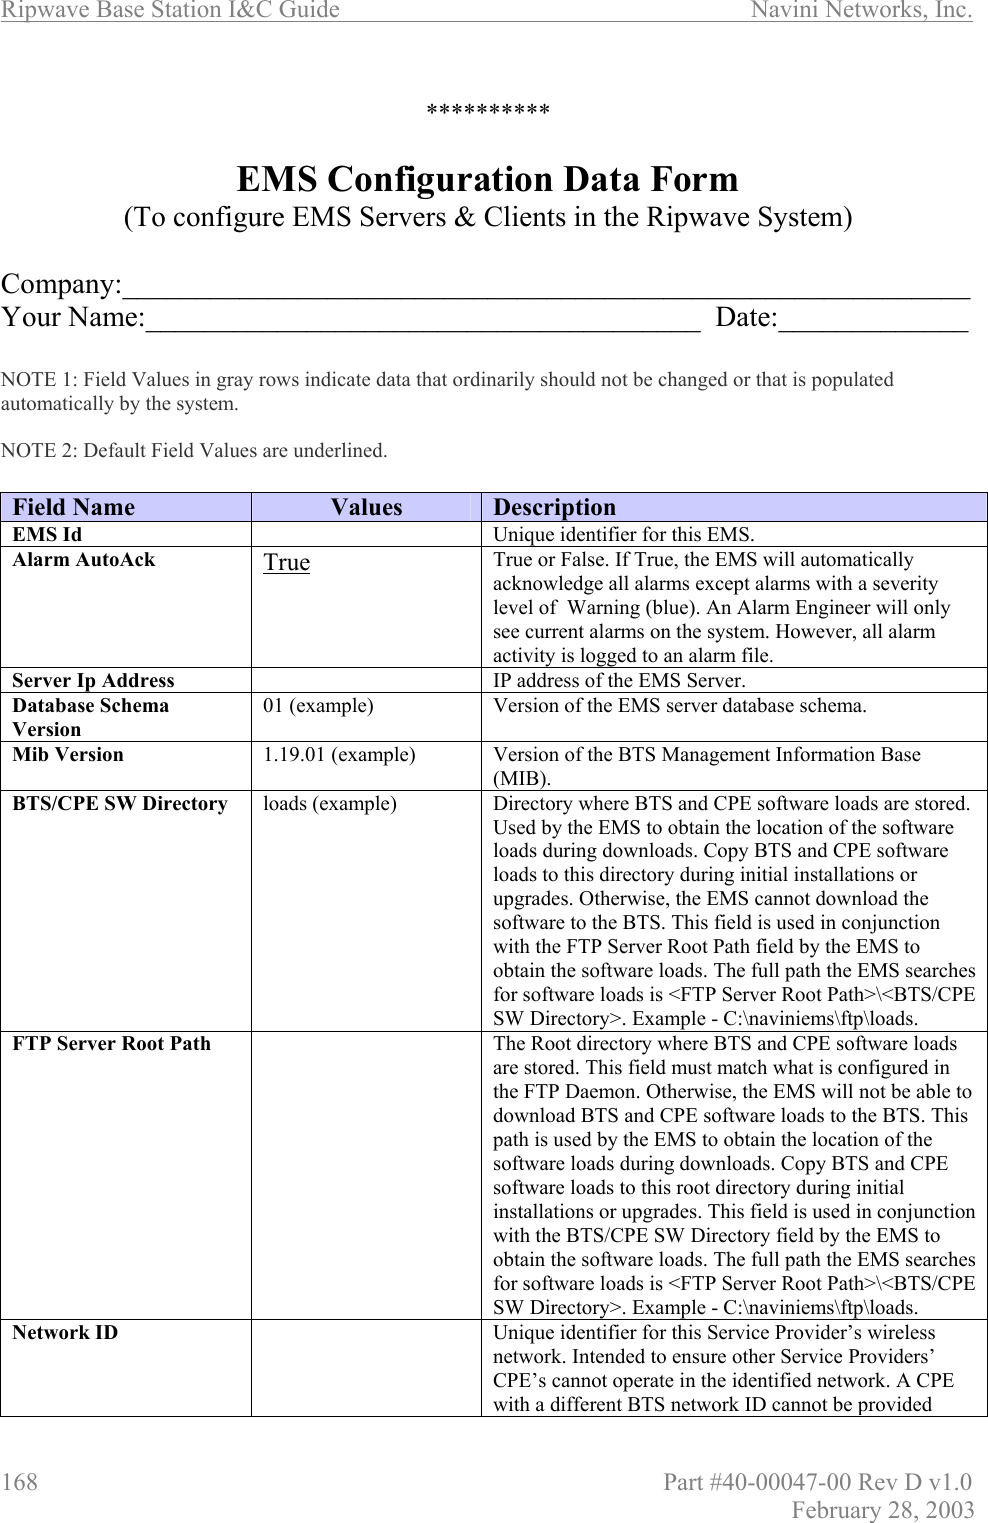 Ripwave Base Station I&amp;C Guide                      Navini Networks, Inc. 168                          Part #40-00047-00 Rev D v1.0 February 28, 2003  **********  EMS Configuration Data Form (To configure EMS Servers &amp; Clients in the Ripwave System)  Company:__________________________________________________________ Your Name:______________________________________  Date:_____________  NOTE 1: Field Values in gray rows indicate data that ordinarily should not be changed or that is populated automatically by the system.  NOTE 2: Default Field Values are underlined.  Field Name  Values  Description EMS Id    Unique identifier for this EMS. Alarm AutoAck  True True or False. If True, the EMS will automatically acknowledge all alarms except alarms with a severity level of  Warning (blue). An Alarm Engineer will only see current alarms on the system. However, all alarm activity is logged to an alarm file. Server Ip Address    IP address of the EMS Server. Database Schema Version 01 (example)  Version of the EMS server database schema. Mib Version  1.19.01 (example)  Version of the BTS Management Information Base (MIB). BTS/CPE SW Directory  loads (example)  Directory where BTS and CPE software loads are stored. Used by the EMS to obtain the location of the software loads during downloads. Copy BTS and CPE software loads to this directory during initial installations or upgrades. Otherwise, the EMS cannot download the software to the BTS. This field is used in conjunction with the FTP Server Root Path field by the EMS to obtain the software loads. The full path the EMS searches for software loads is &lt;FTP Server Root Path&gt;\&lt;BTS/CPE SW Directory&gt;. Example - C:\naviniems\ftp\loads. FTP Server Root Path    The Root directory where BTS and CPE software loads are stored. This field must match what is configured in the FTP Daemon. Otherwise, the EMS will not be able to download BTS and CPE software loads to the BTS. This path is used by the EMS to obtain the location of the software loads during downloads. Copy BTS and CPE software loads to this root directory during initial installations or upgrades. This field is used in conjunction with the BTS/CPE SW Directory field by the EMS to obtain the software loads. The full path the EMS searches for software loads is &lt;FTP Server Root Path&gt;\&lt;BTS/CPE SW Directory&gt;. Example - C:\naviniems\ftp\loads. Network ID    Unique identifier for this Service Provider’s wireless network. Intended to ensure other Service Providers’ CPE’s cannot operate in the identified network. A CPE with a different BTS network ID cannot be provided 